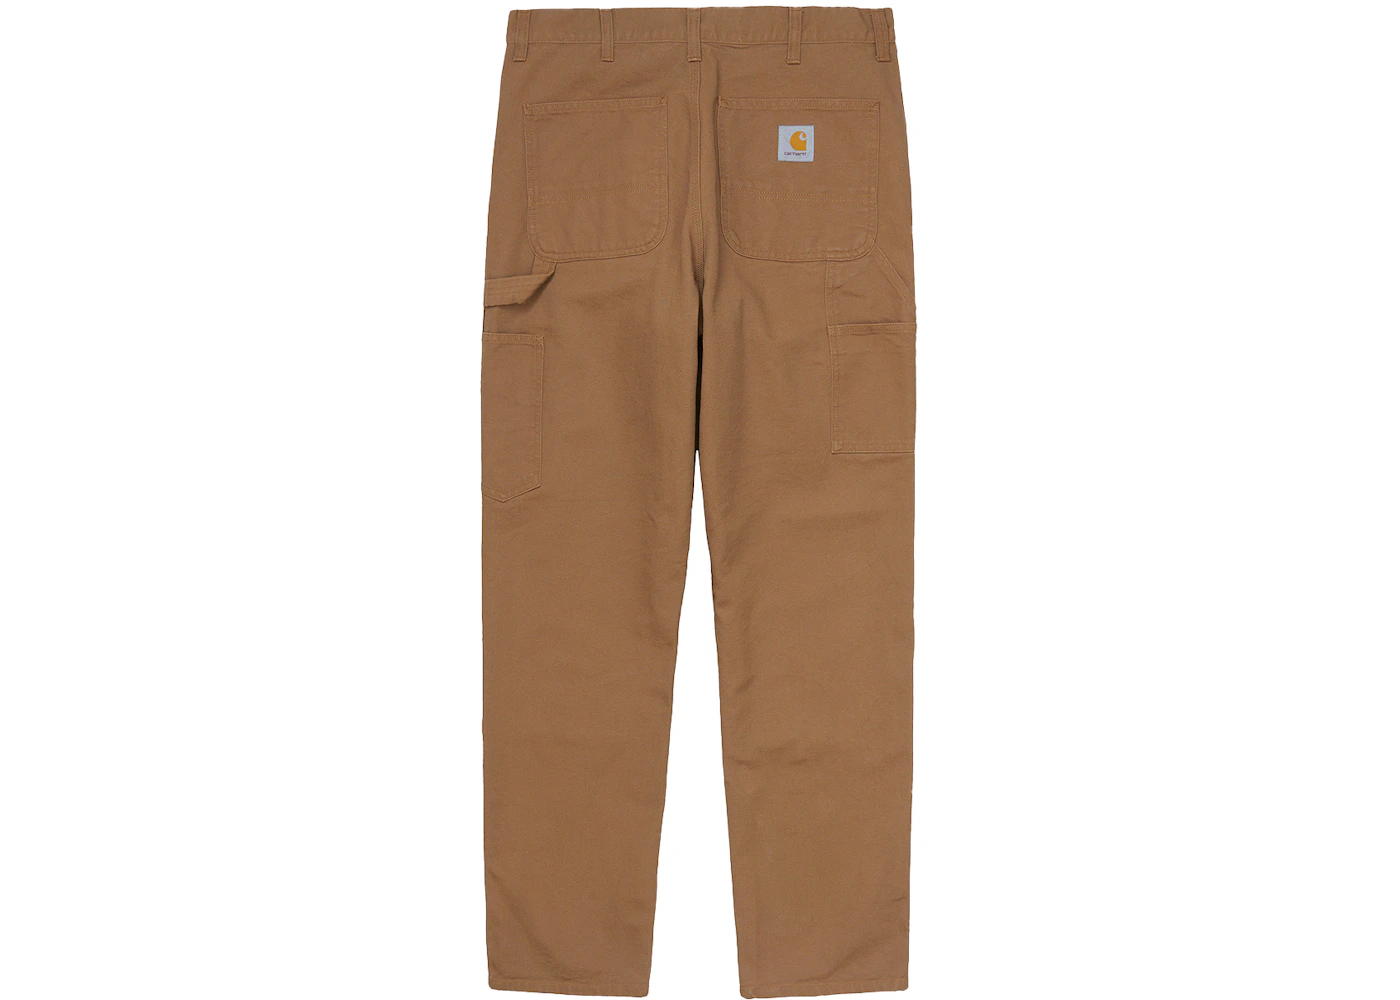 Carhartt WIP Double Knee Dearborn Canvas 12oz Relaxed Straight Fit Pants  Hamilton Brown (Rinsed) Men's - SS22 - US